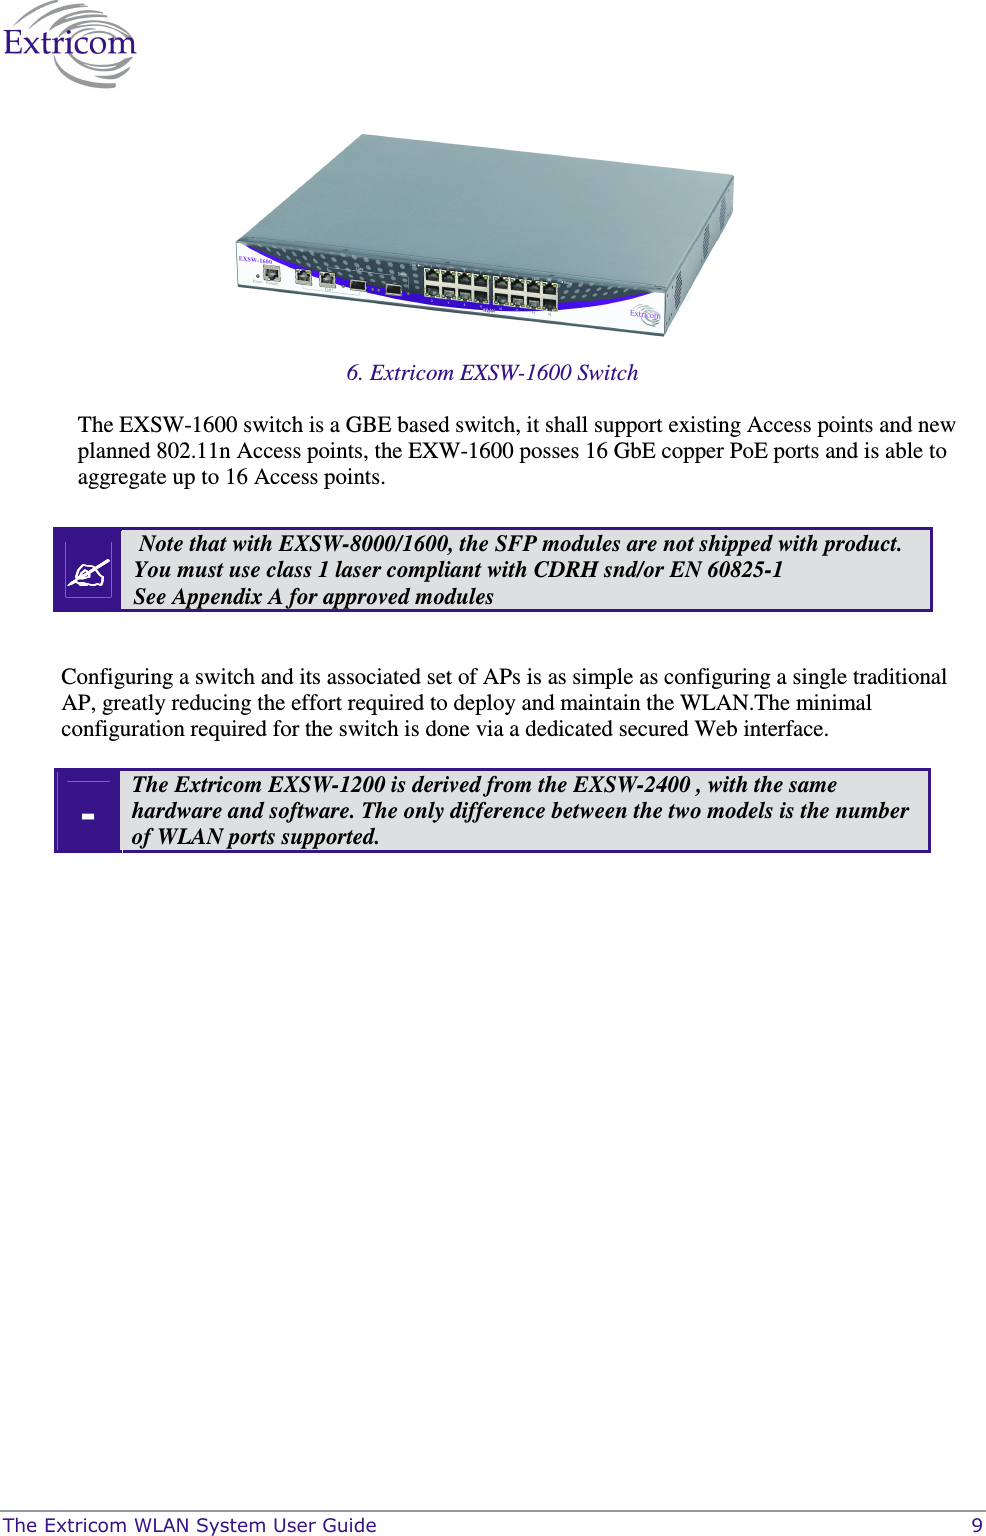  The Extricom WLAN System User Guide    9  6. Extricom EXSW-1600 Switch The EXSW-1600 switch is a GBE based switch, it shall support existing Access points and new planned 802.11n Access points, the EXW-1600 posses 16 GbE copper PoE ports and is able to aggregate up to 16 Access points.    Note that with EXSW-8000/1600, the SFP modules are not shipped with product. You must use class 1 laser compliant with CDRH snd/or EN 60825-1 See Appendix A for approved modules  Configuring a switch and its associated set of APs is as simple as configuring a single traditional AP, greatly reducing the effort required to deploy and maintain the WLAN.The minimal configuration required for the switch is done via a dedicated secured Web interface. - The Extricom EXSW-1200 is derived from the EXSW-2400 , with the same hardware and software. The only difference between the two models is the number of WLAN ports supported.  